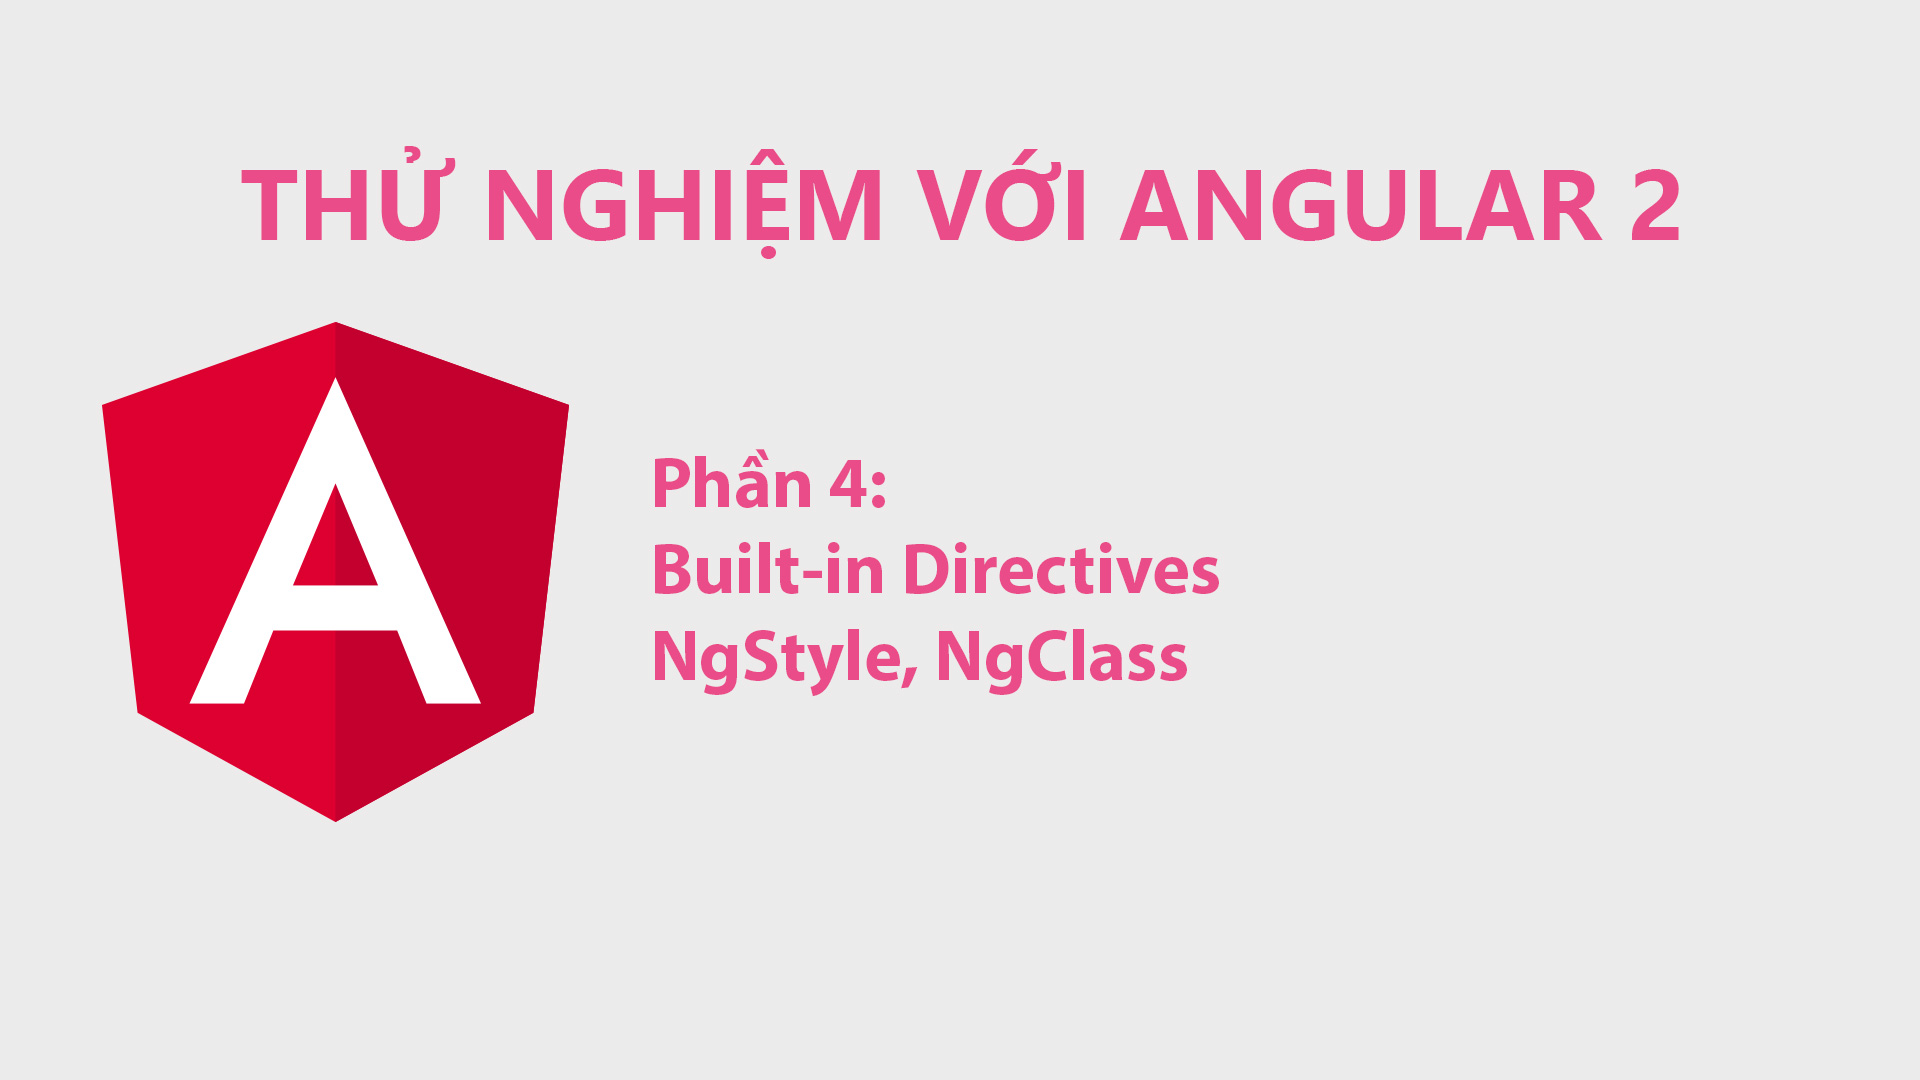 Thử Nghiệm Với Angular 2 Phần 4: Built-in Directives NgStyle, NgClass